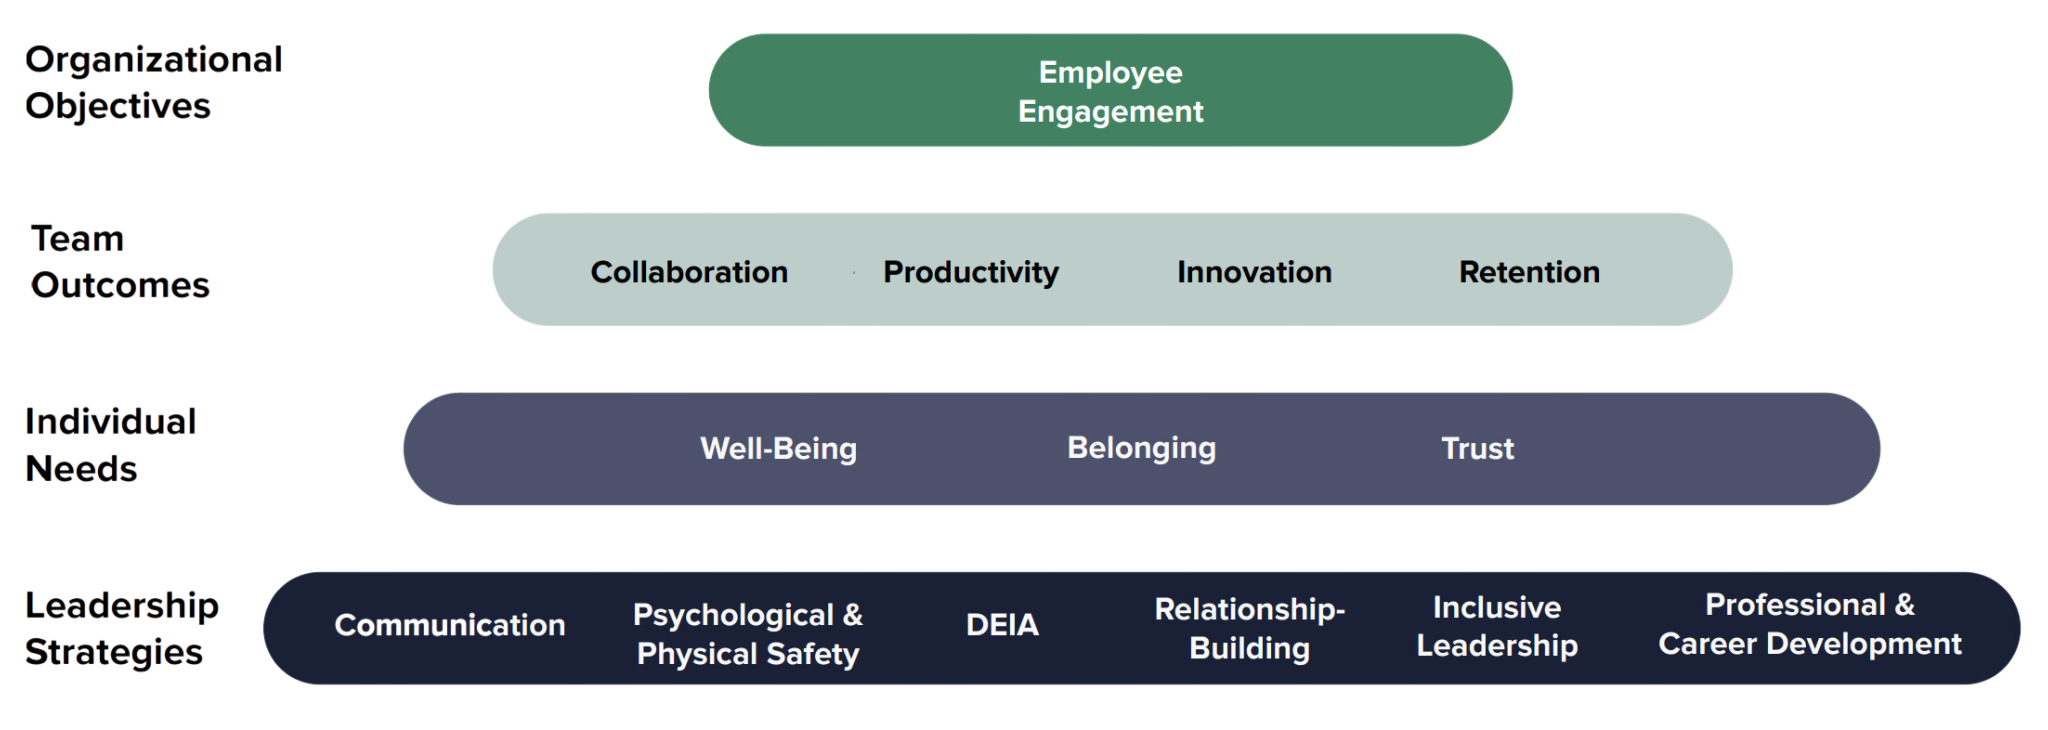 employee engagement growth model chart